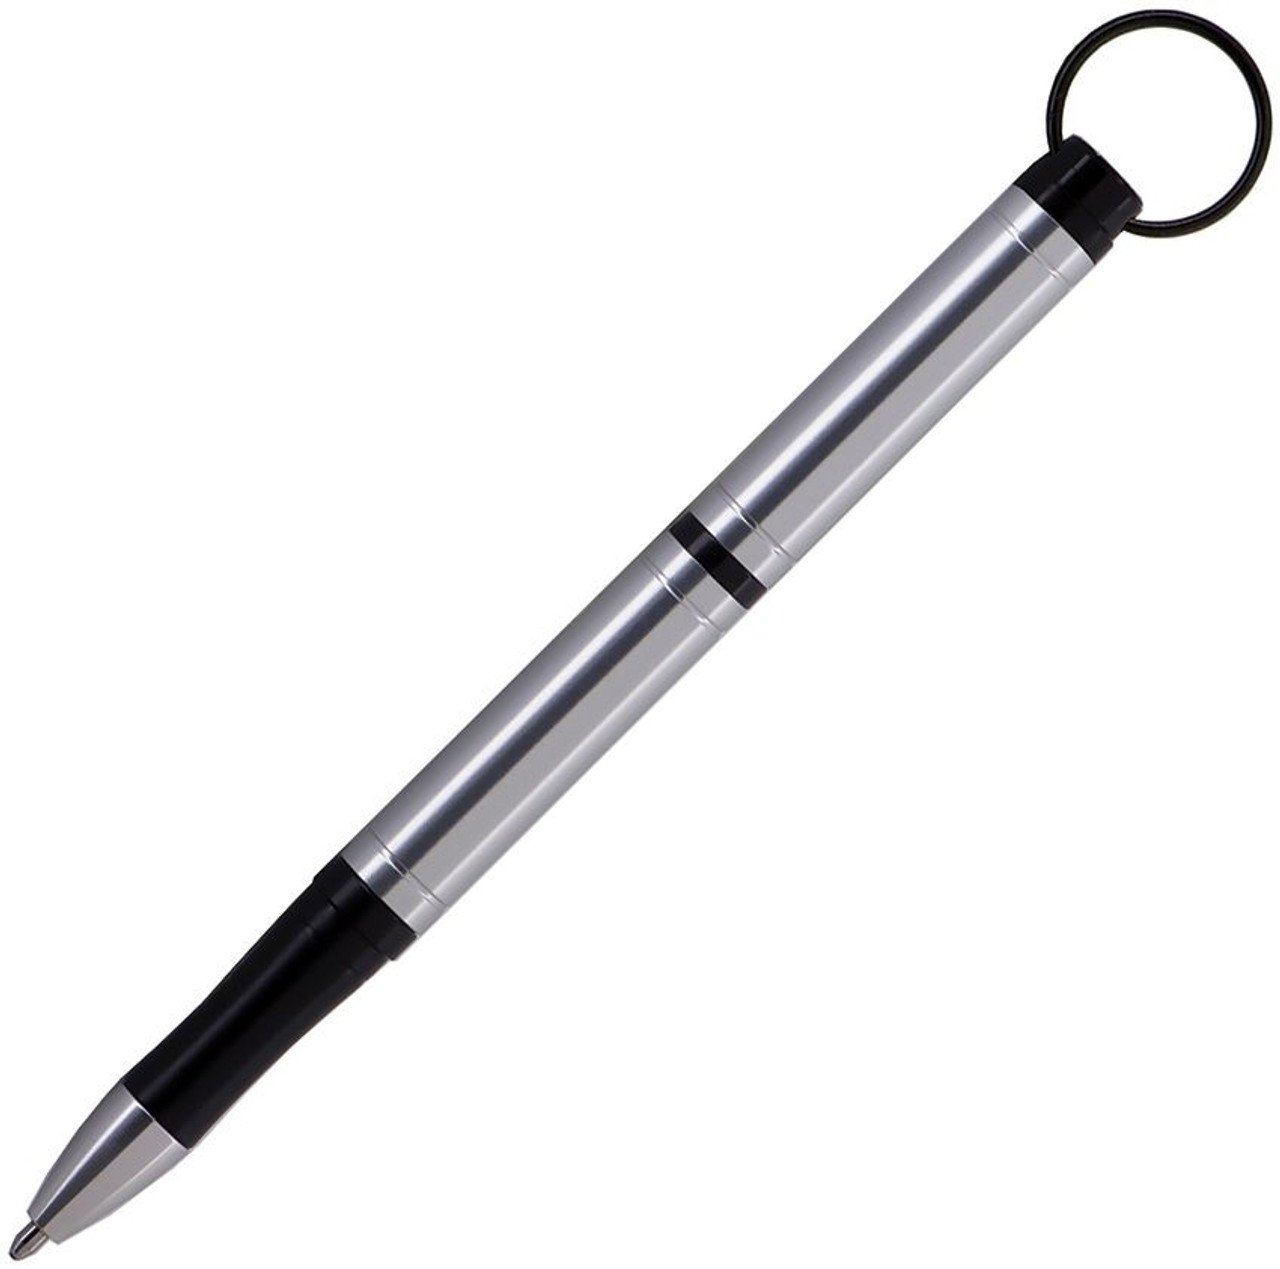 Fisher Space Pens Backpacker Keyring (FP950328) PR4 Black Ink, Anodized Silver Barrell, Anodized Black Cap